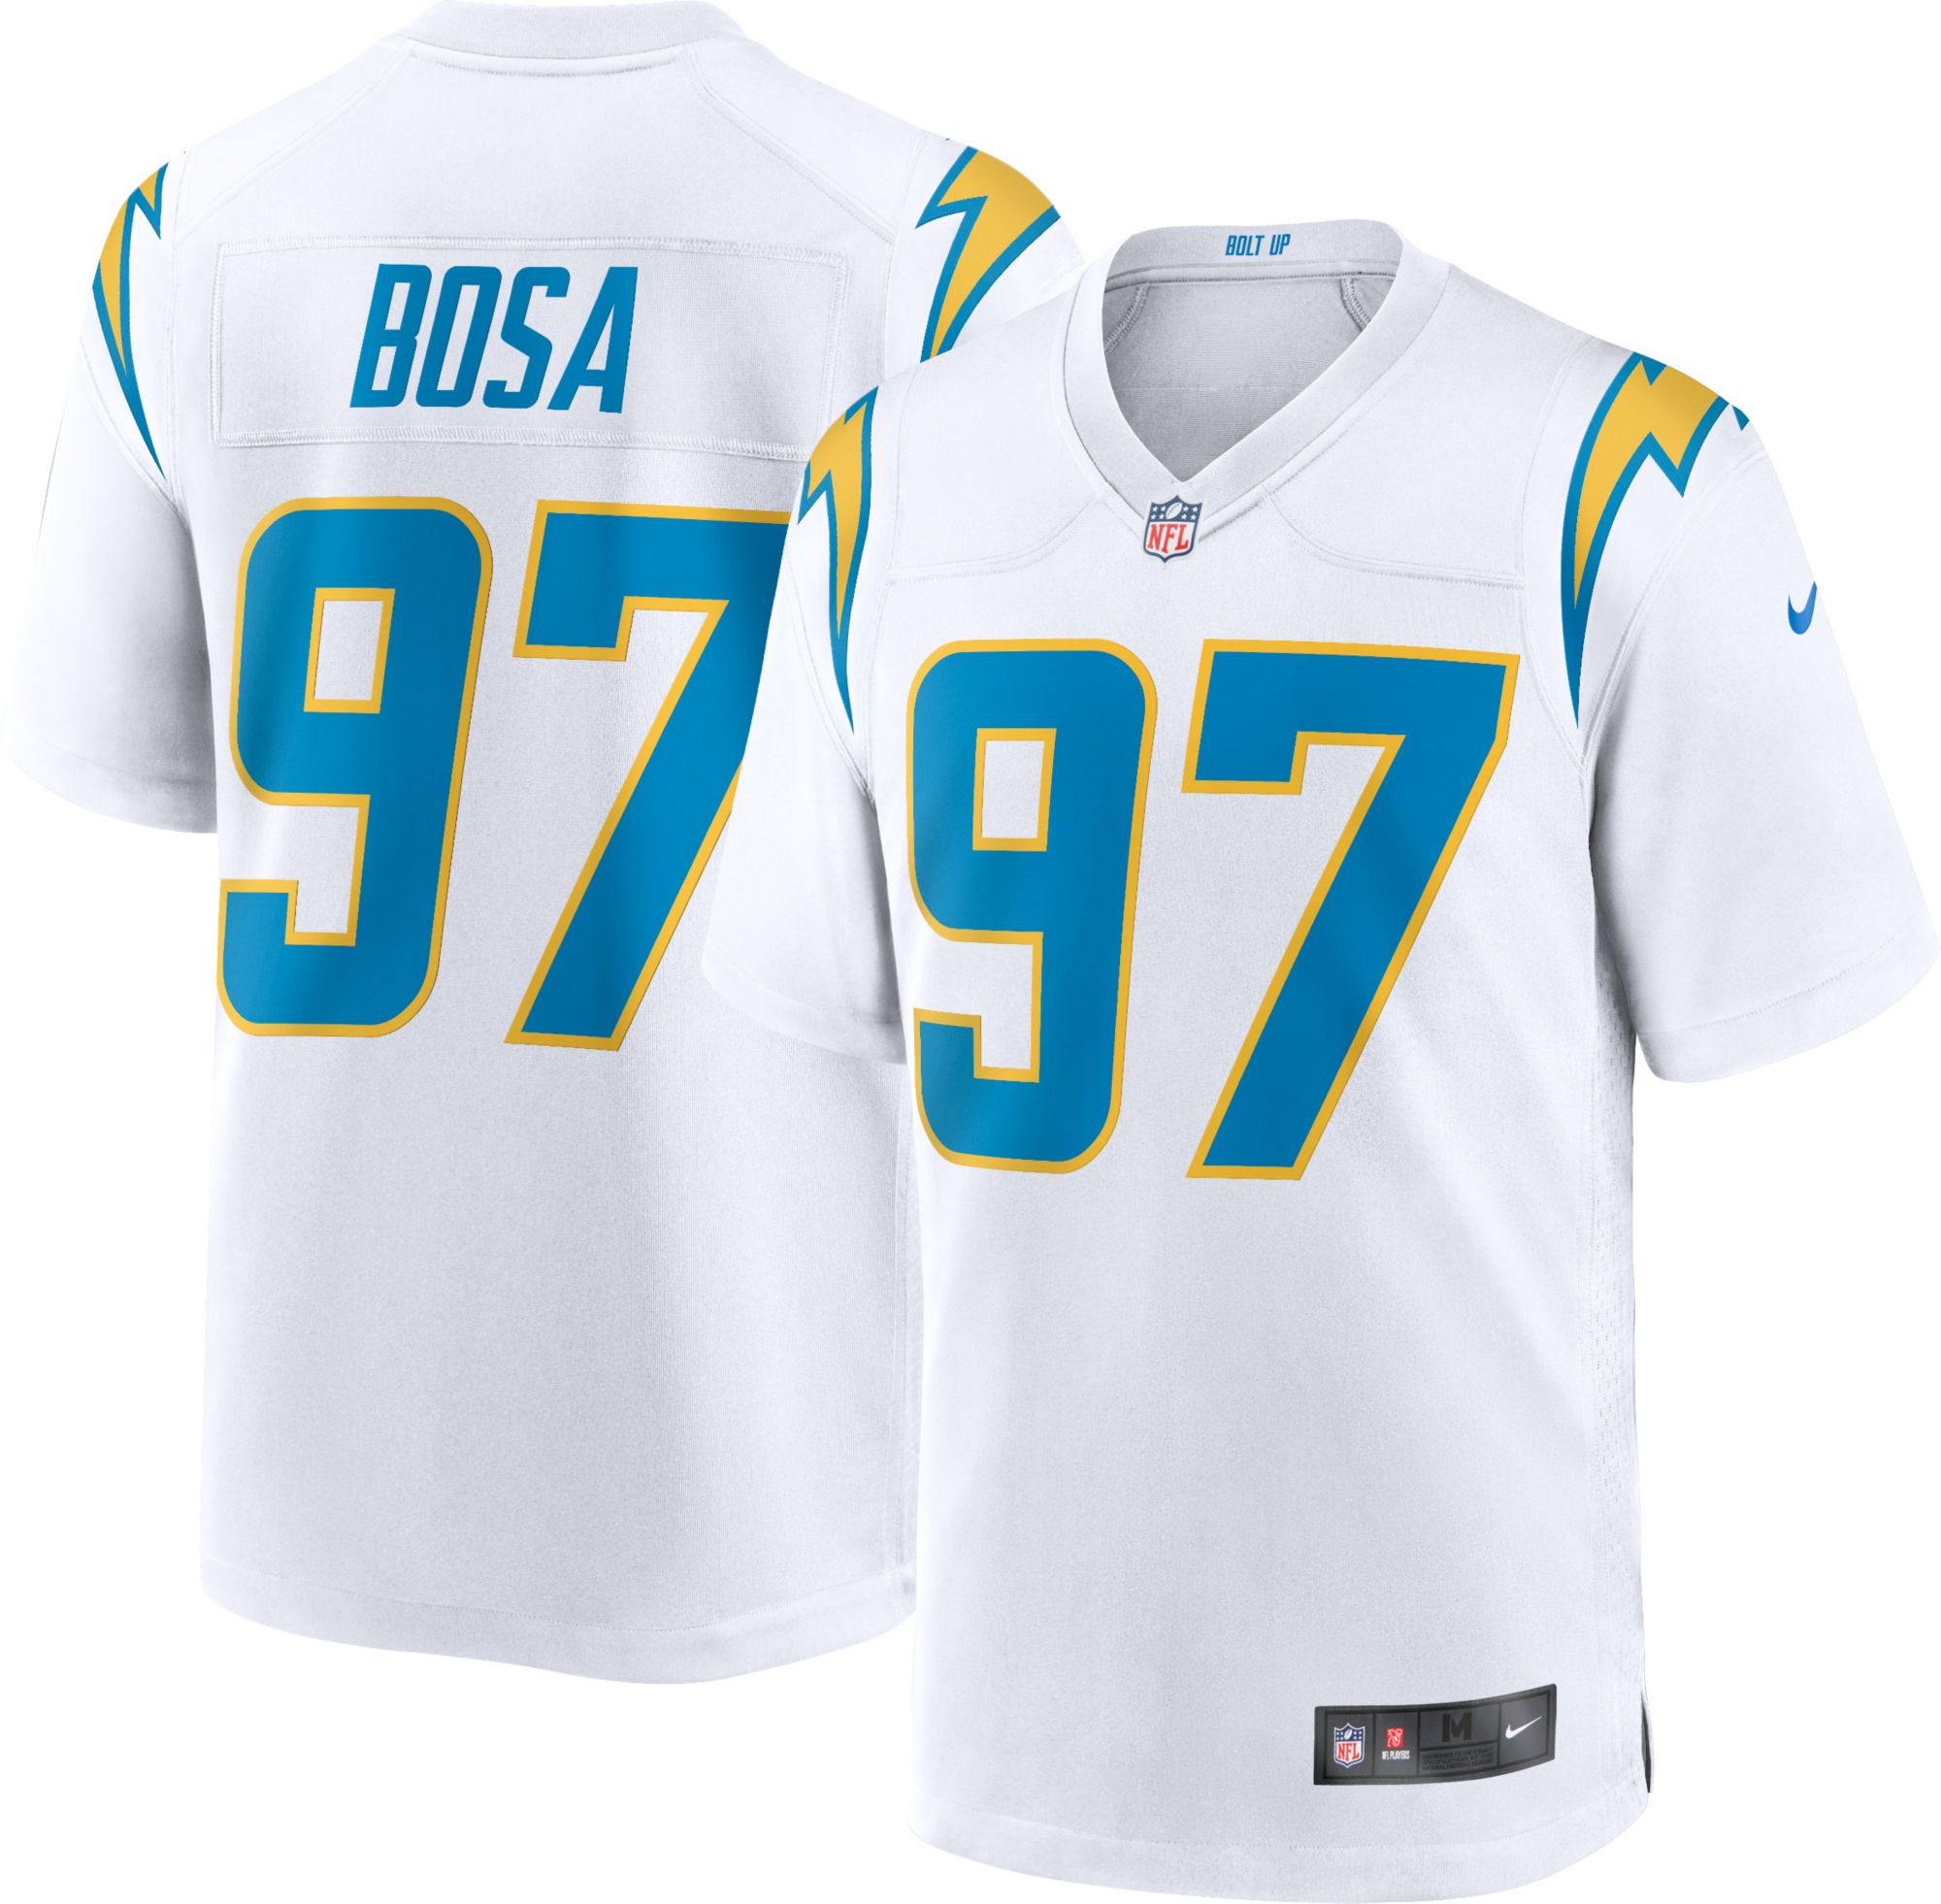 white chargers jersey